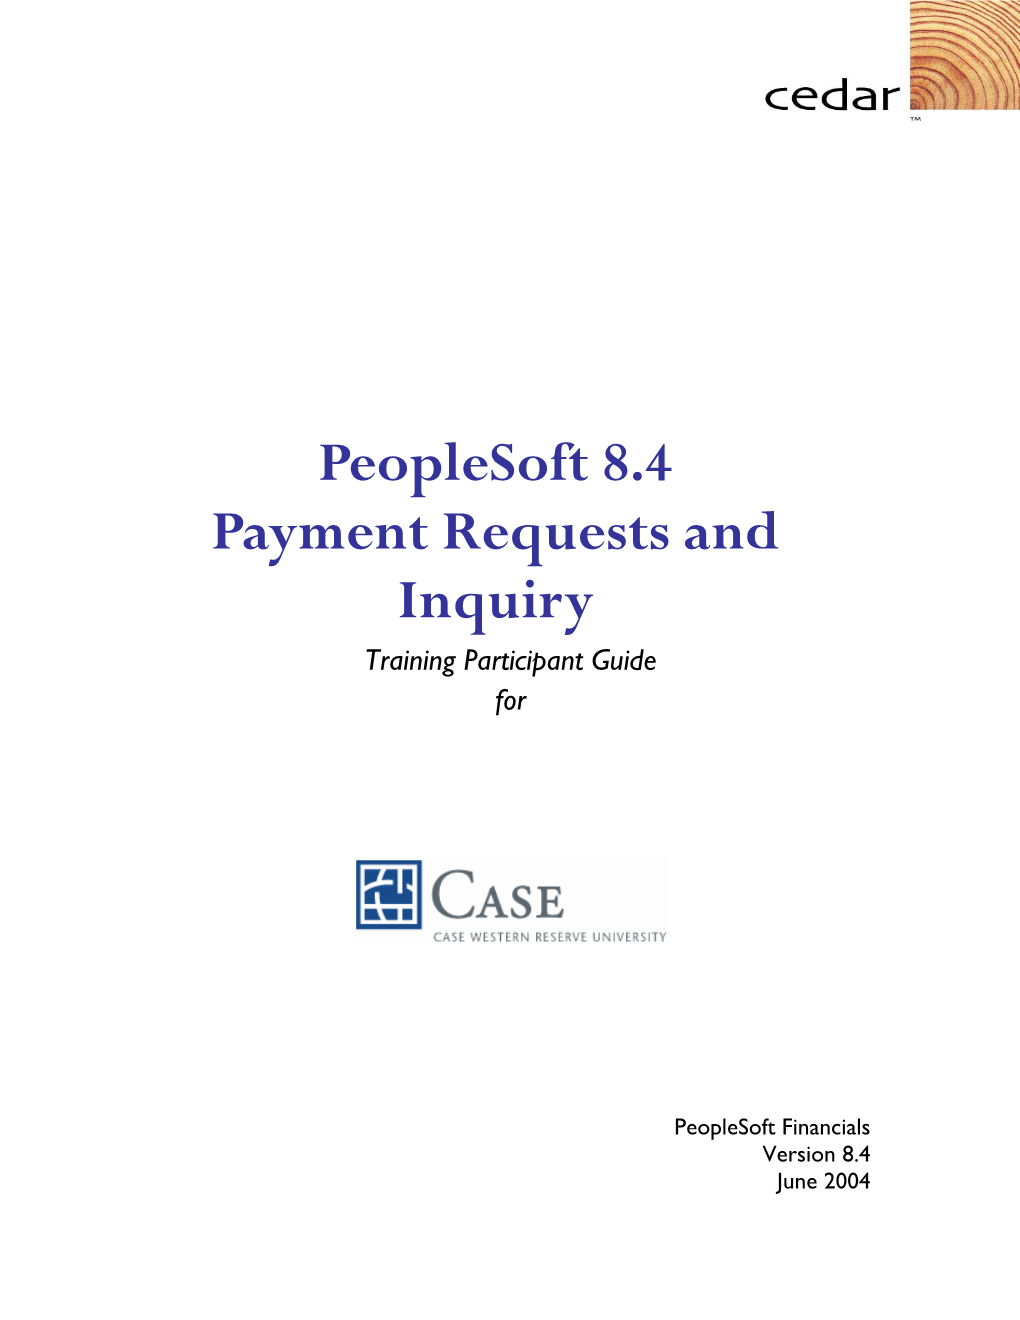 Peoplesoft 8.4 Payment Requests and Inquiry Training Participant Guide For